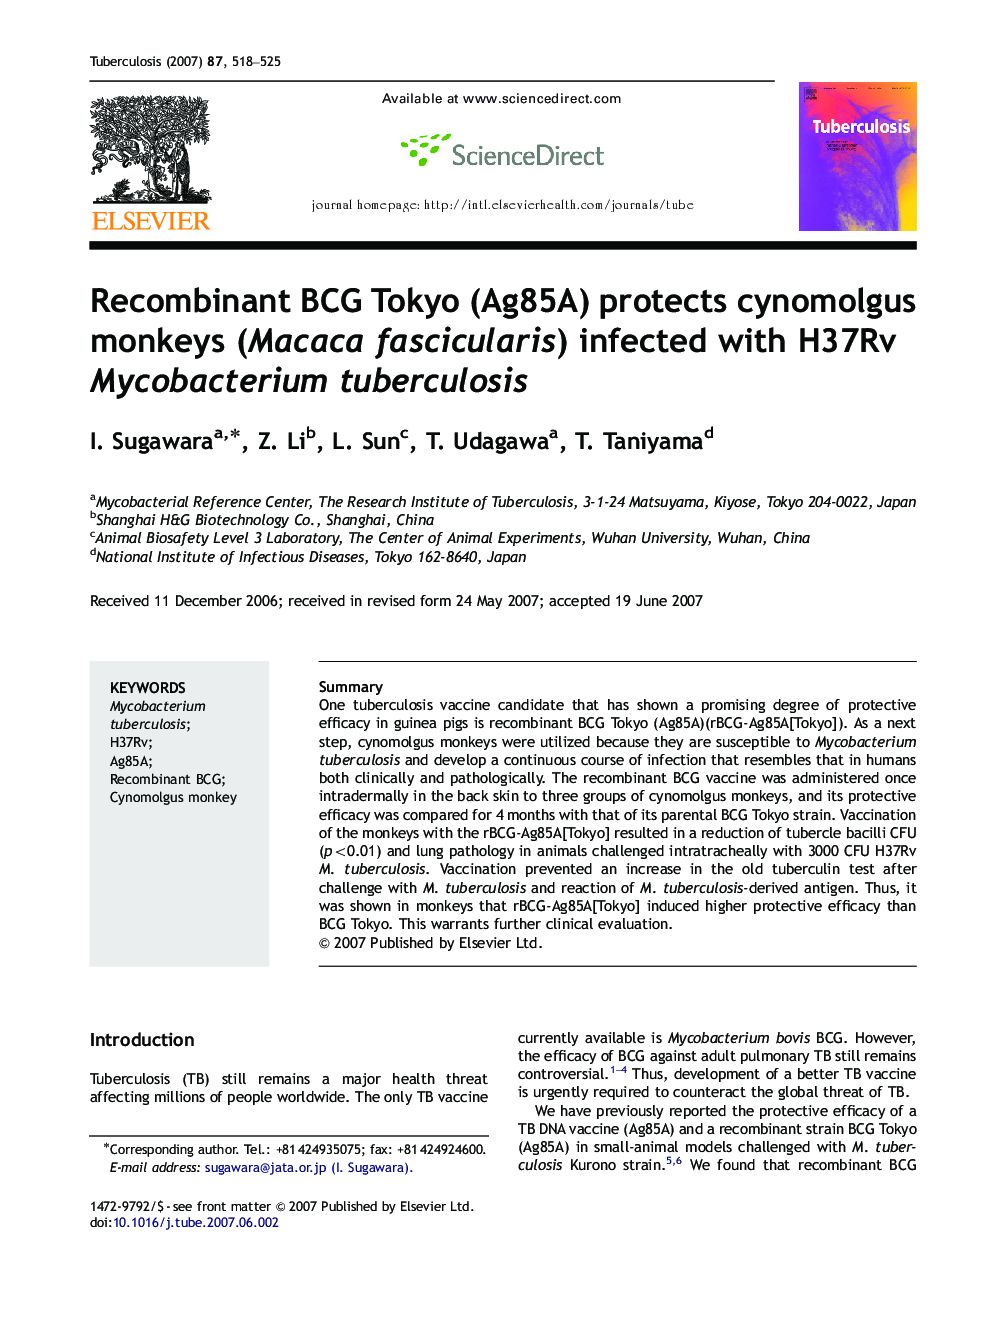 Recombinant BCG Tokyo (Ag85A) protects cynomolgus monkeys (Macaca fascicularis) infected with H37Rv Mycobacterium tuberculosis